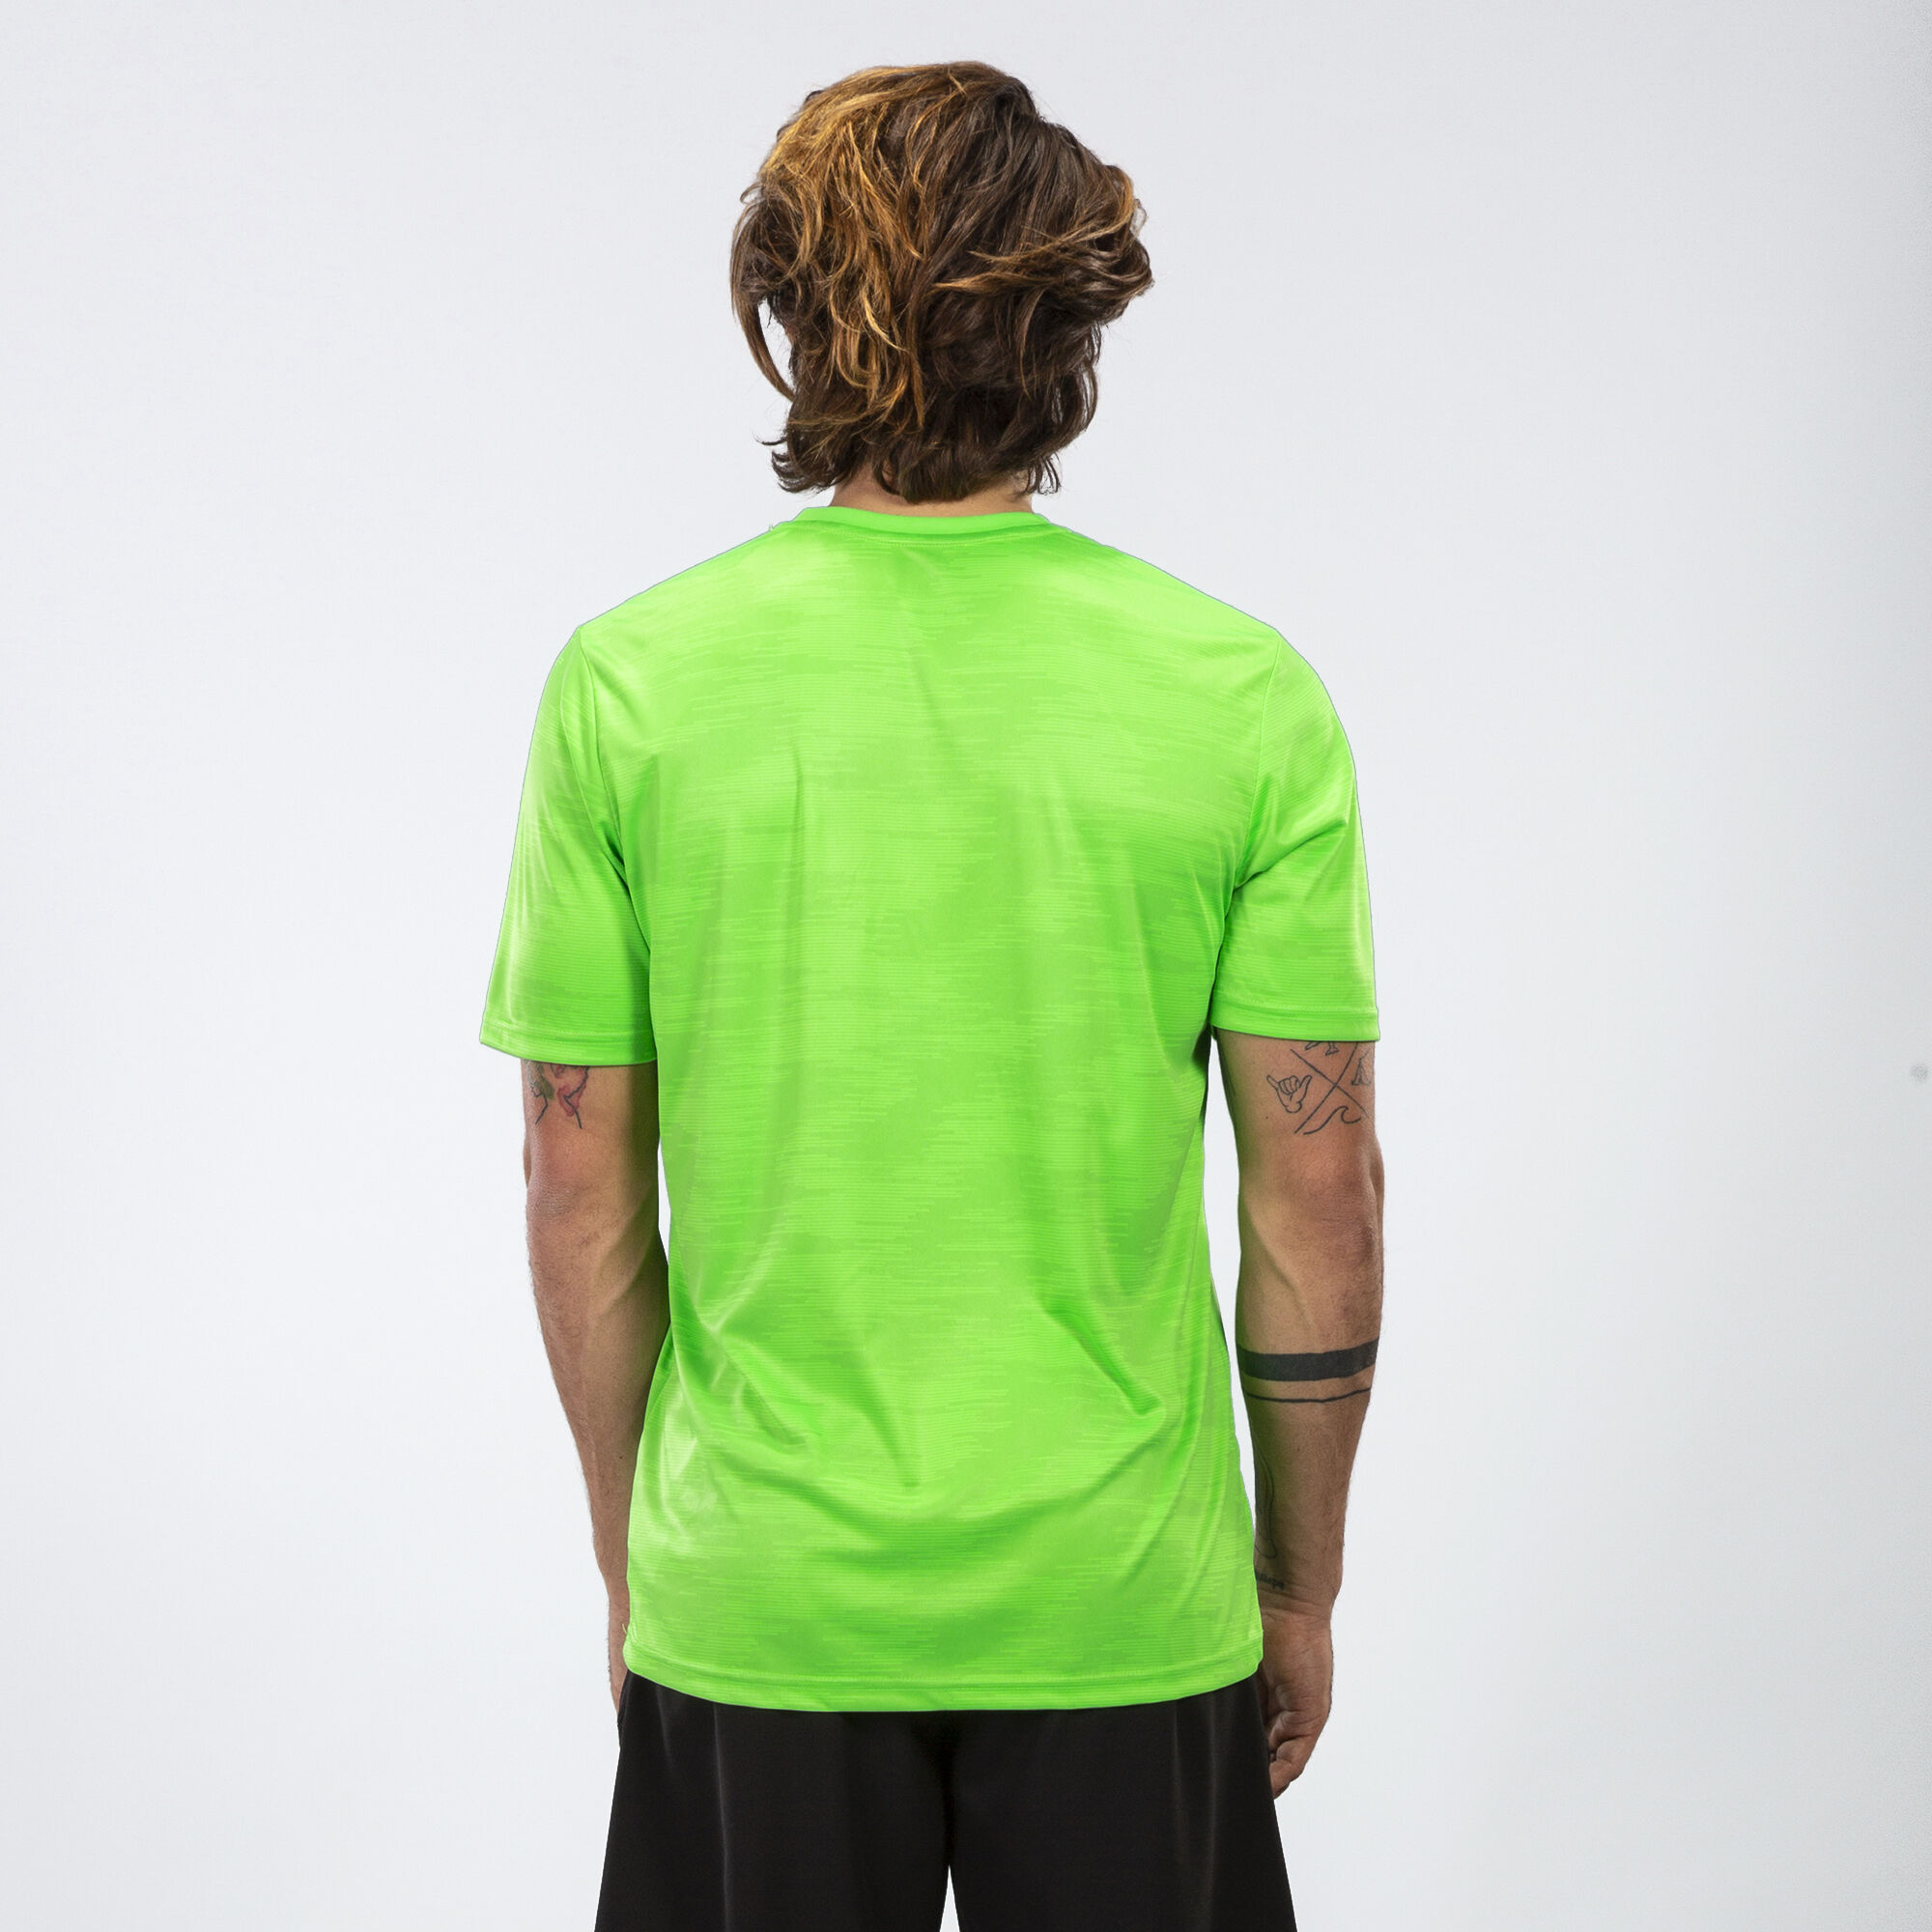 MAILLOT MANCHES COURTES HOMME GRAFITY VERT FLUO